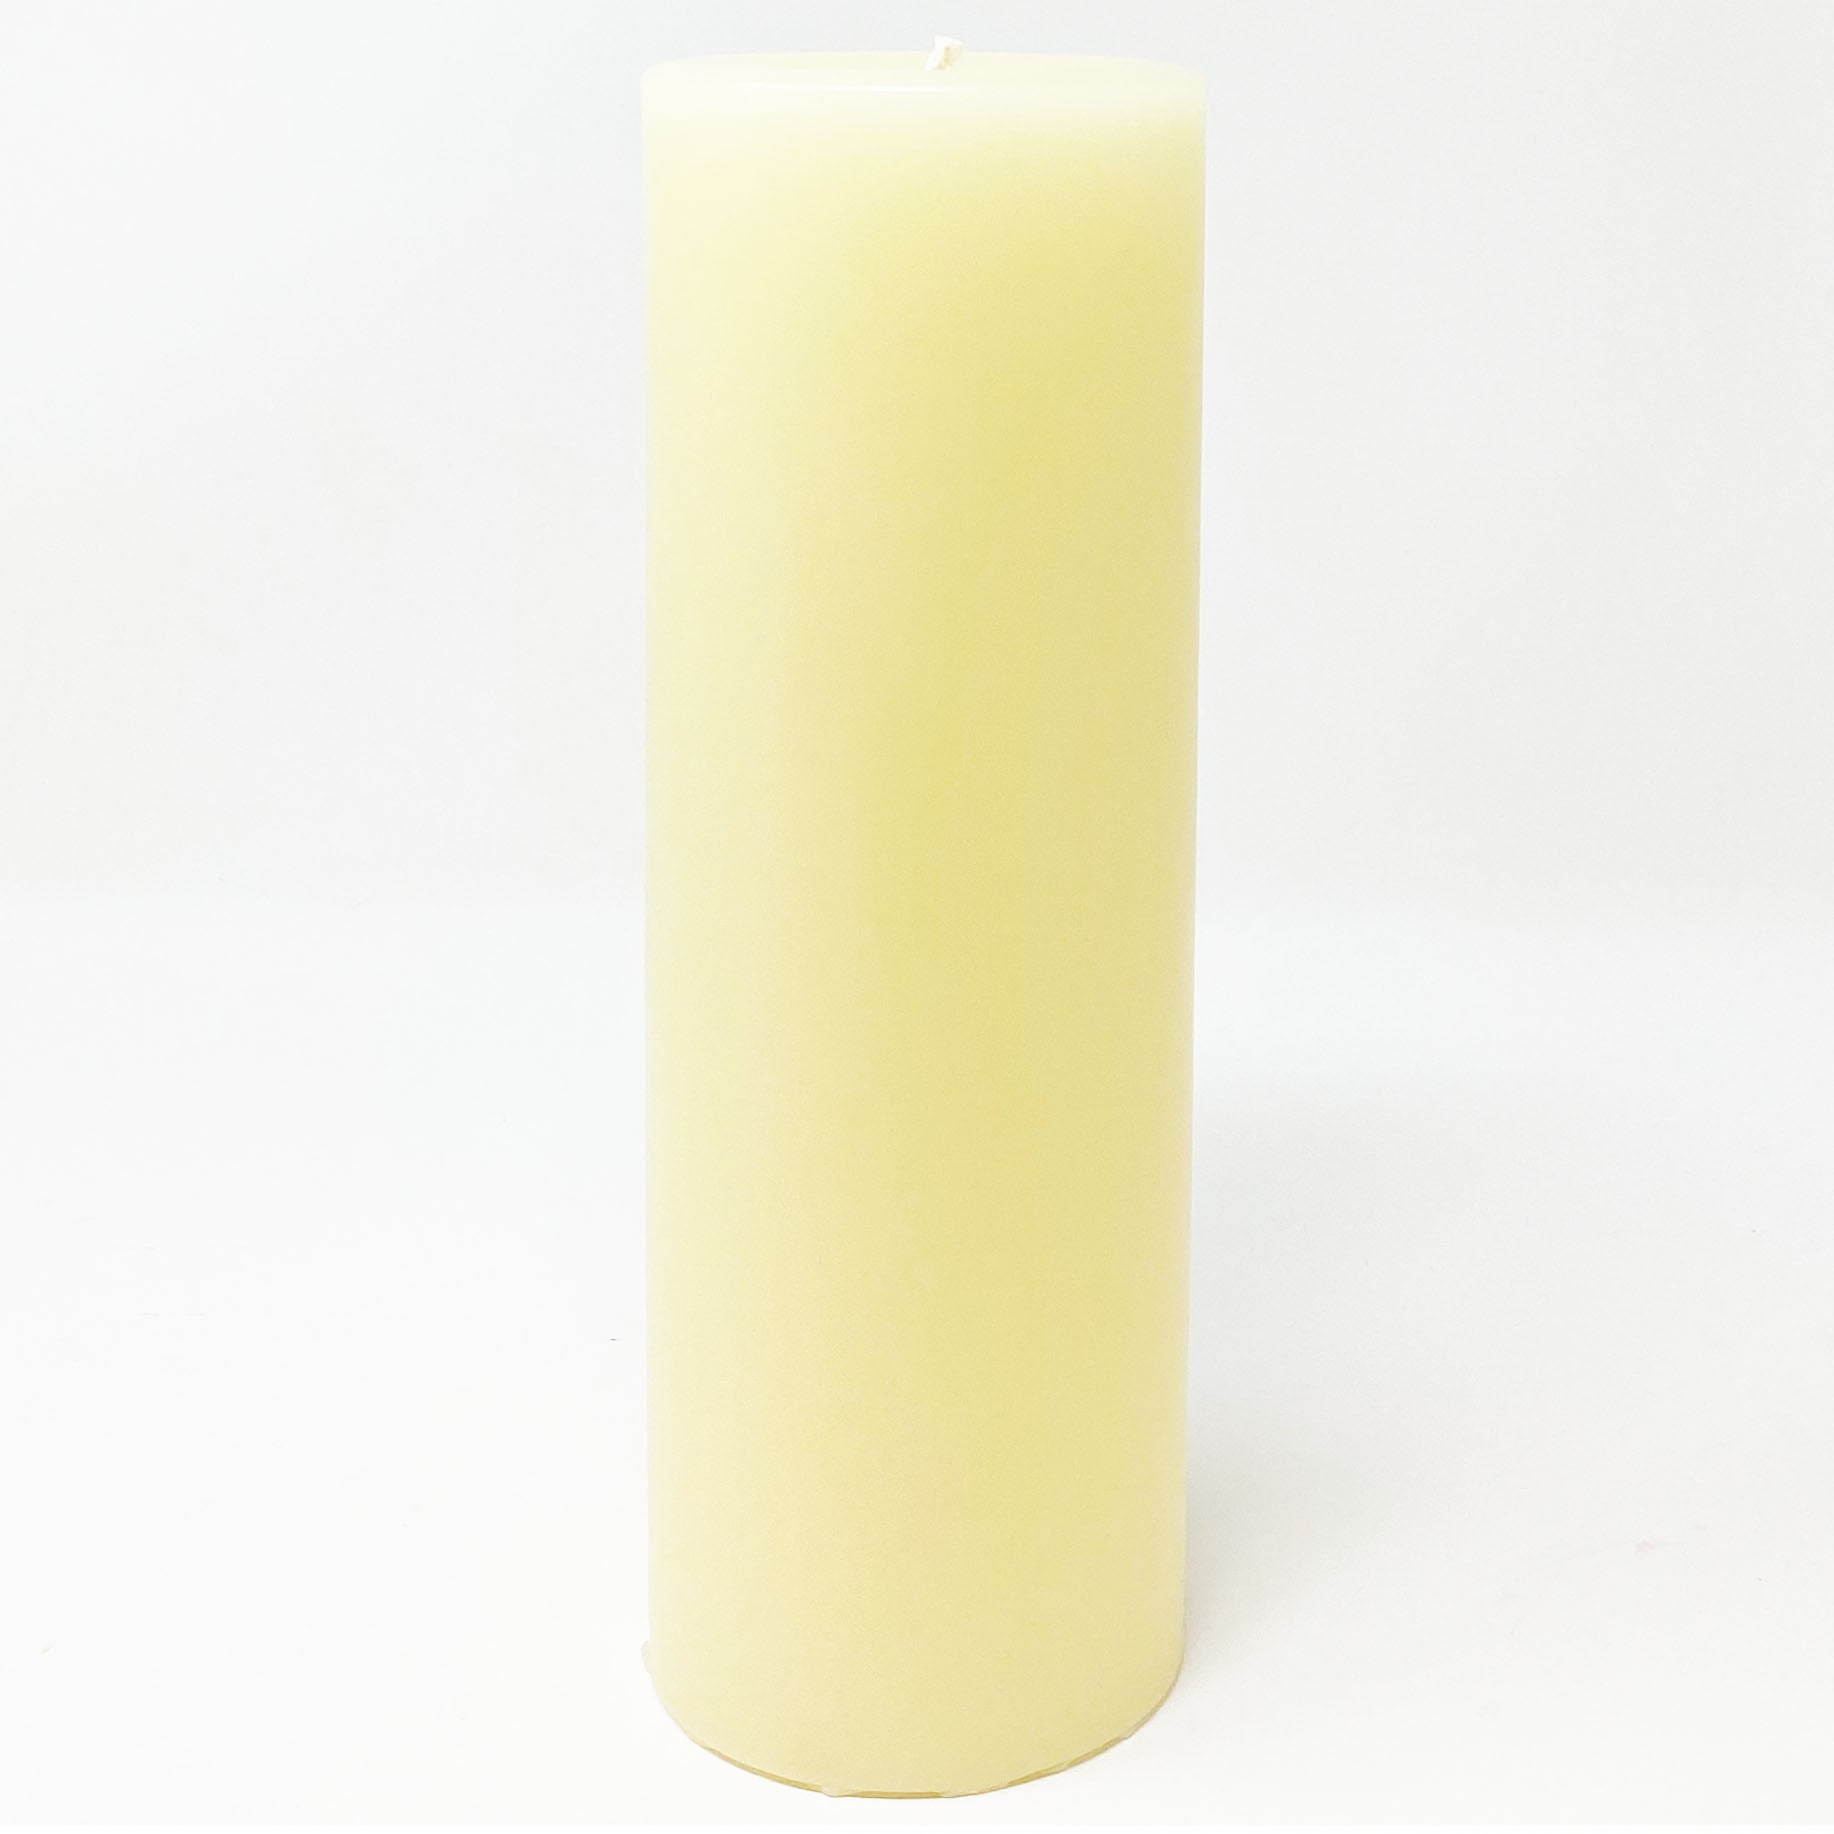 3x9" French Vanilla Scented Pillar Candle